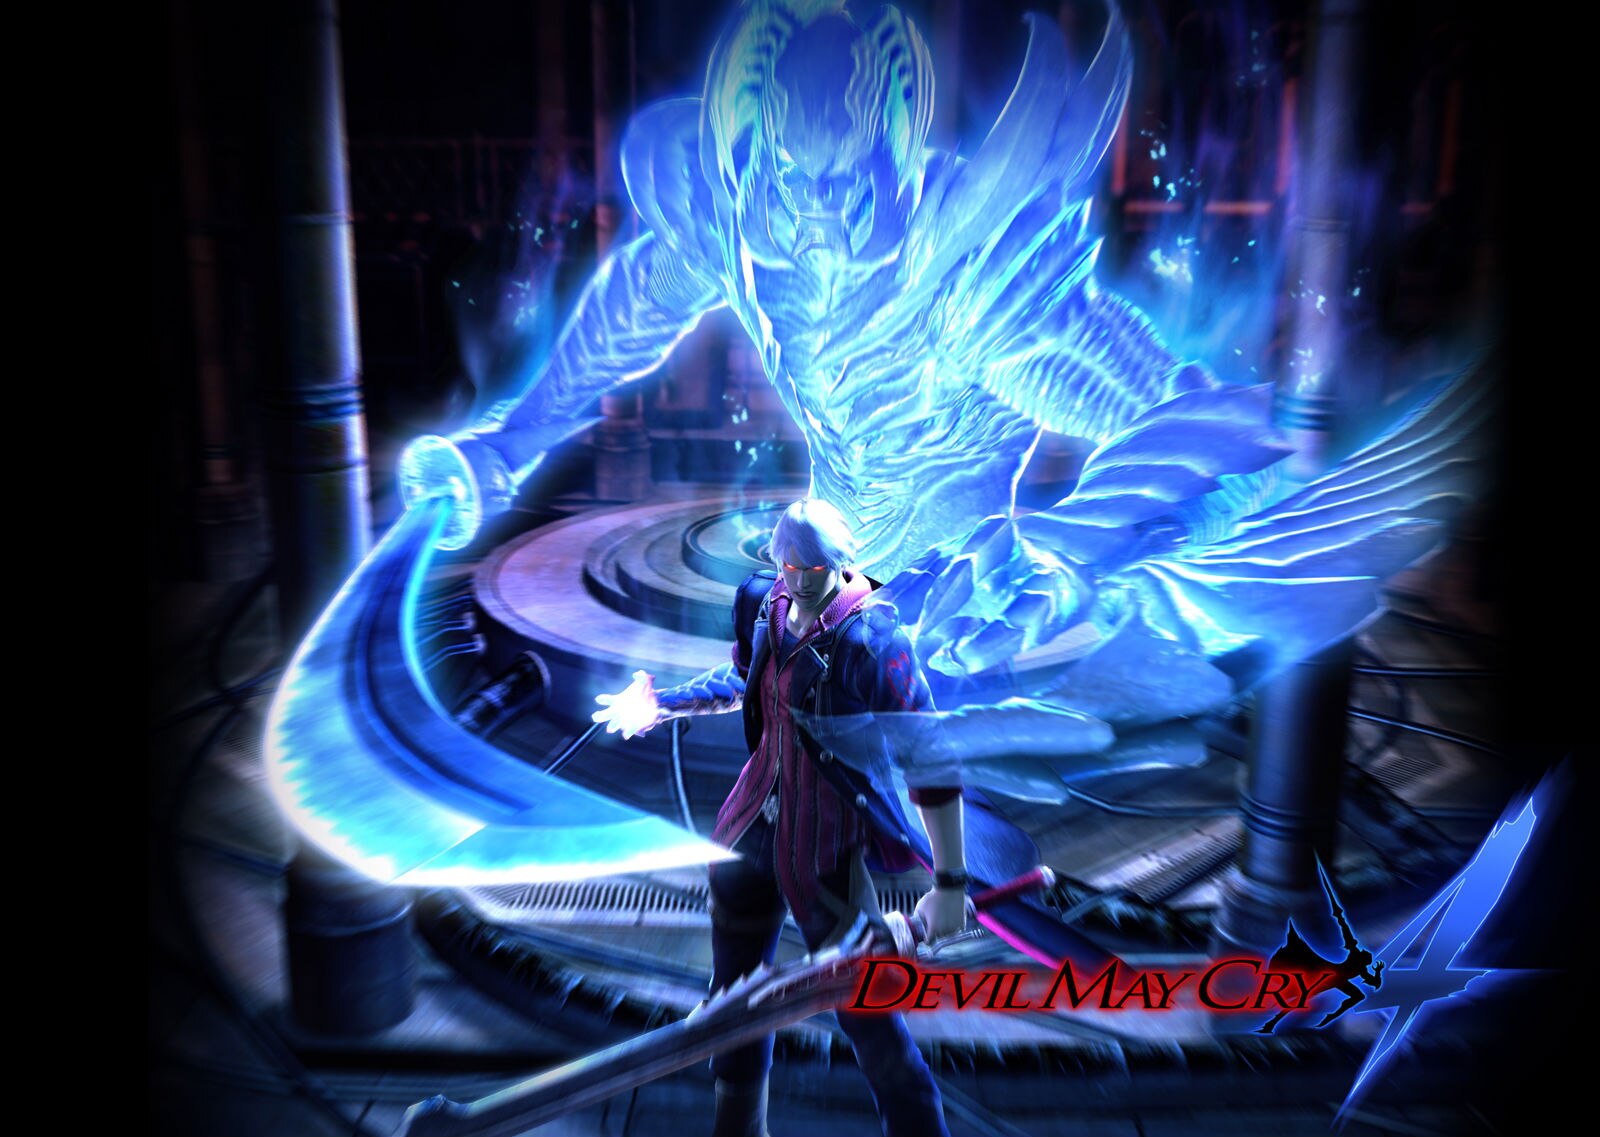 New Spawn Content Mod Pack for Devil May Cry 5 is now available for download